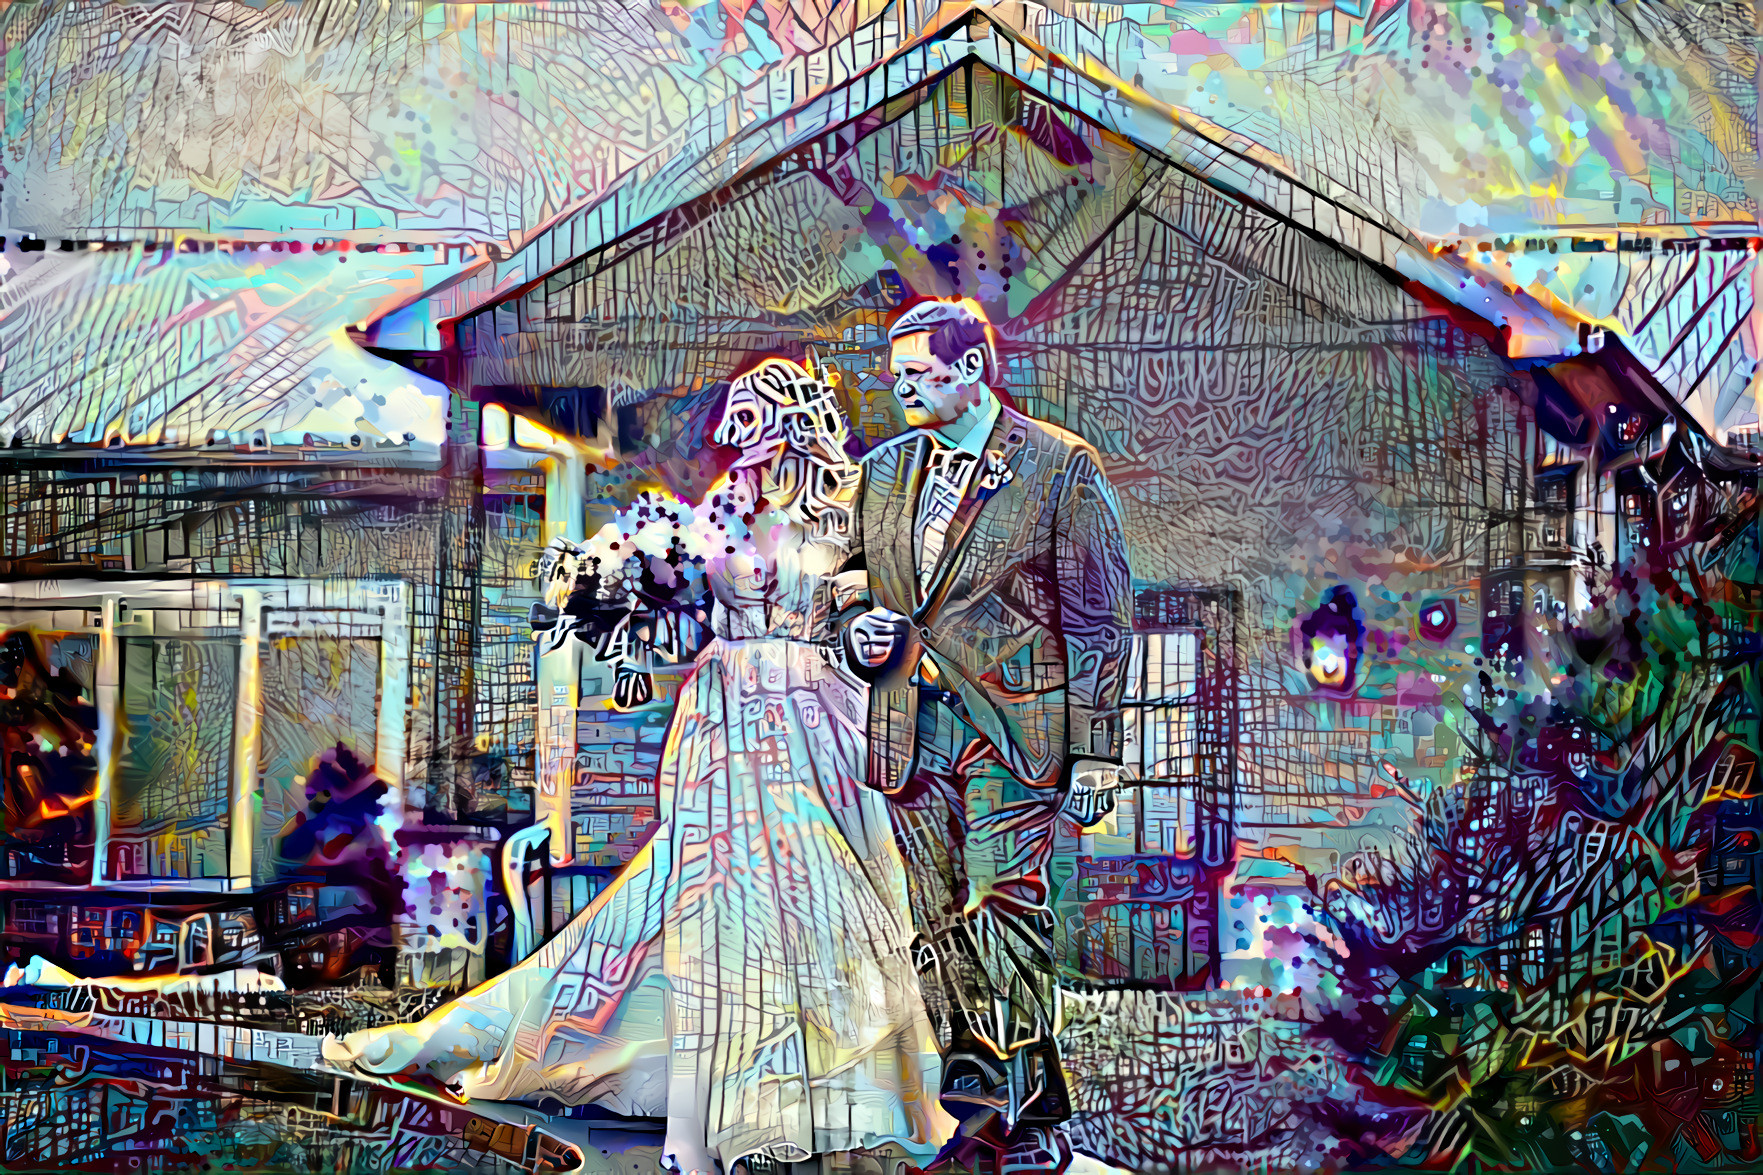 Father and cyborg bride